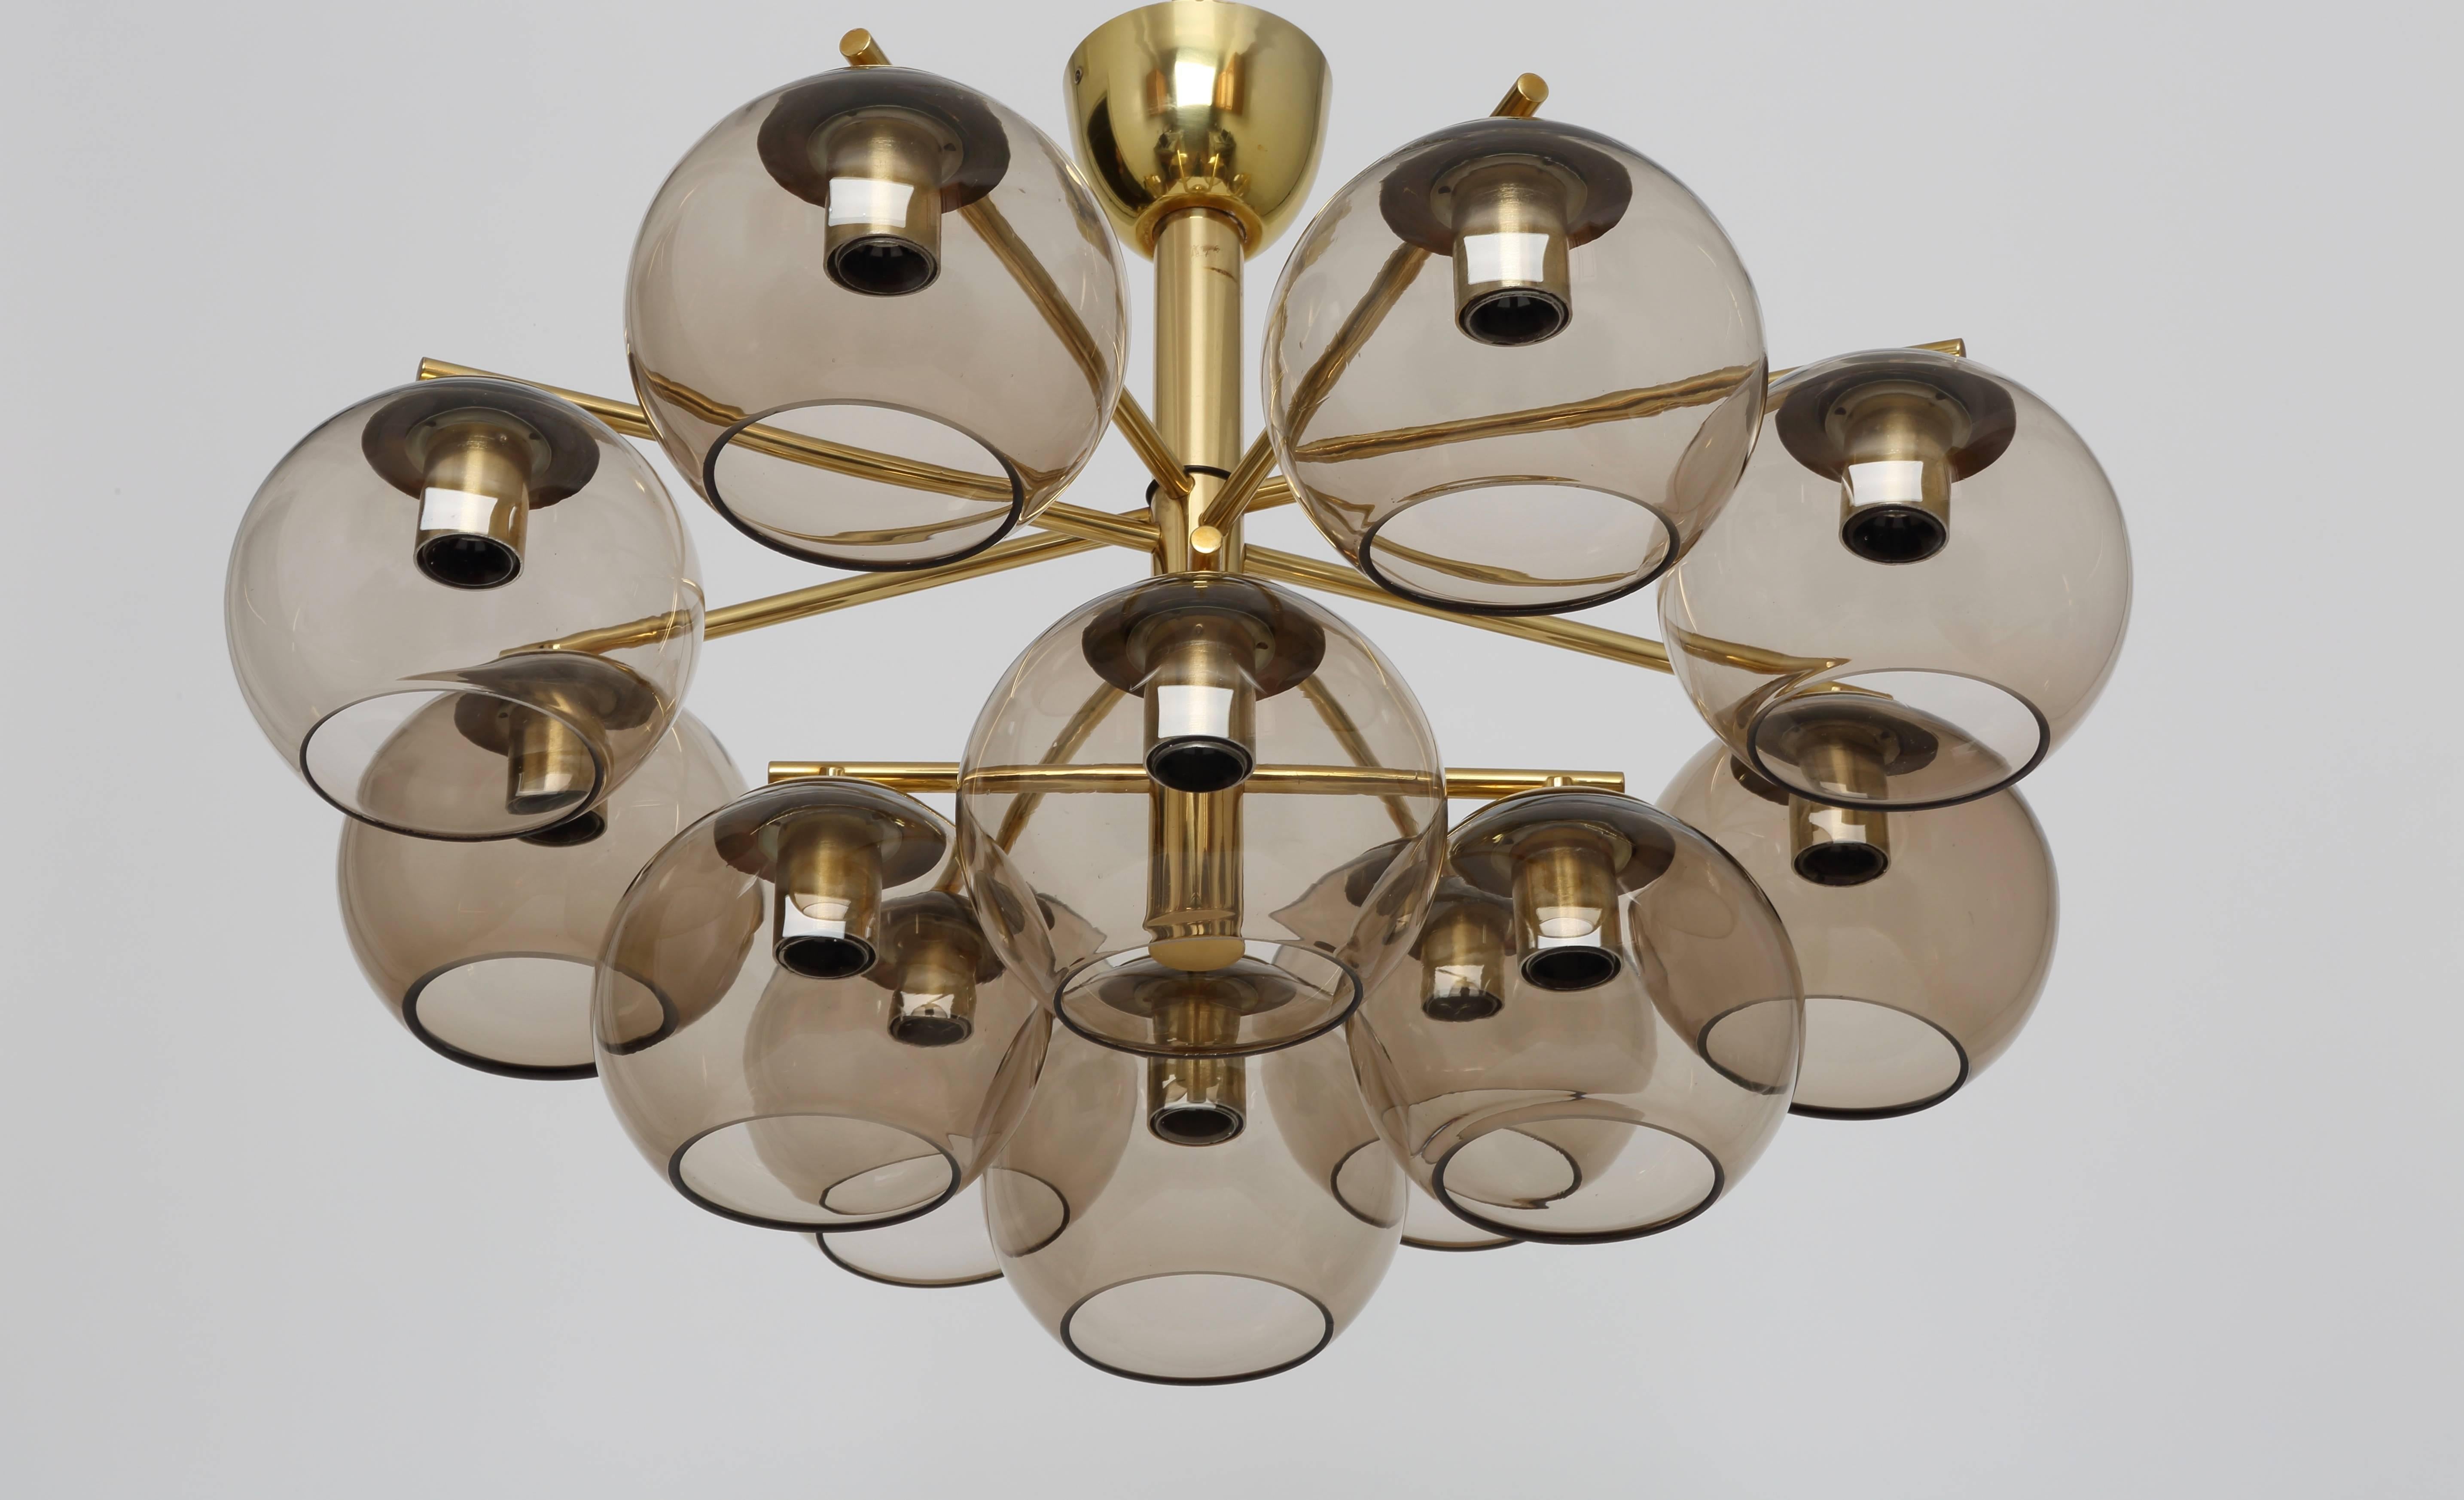 Twelve-light brass chandelier in the style of Hans-Agne Jakobsson.
Smoked glass in a very beautiful smokey brown color.
Made with brass and brass-plated metal, Europe, 1960s.
With only 16